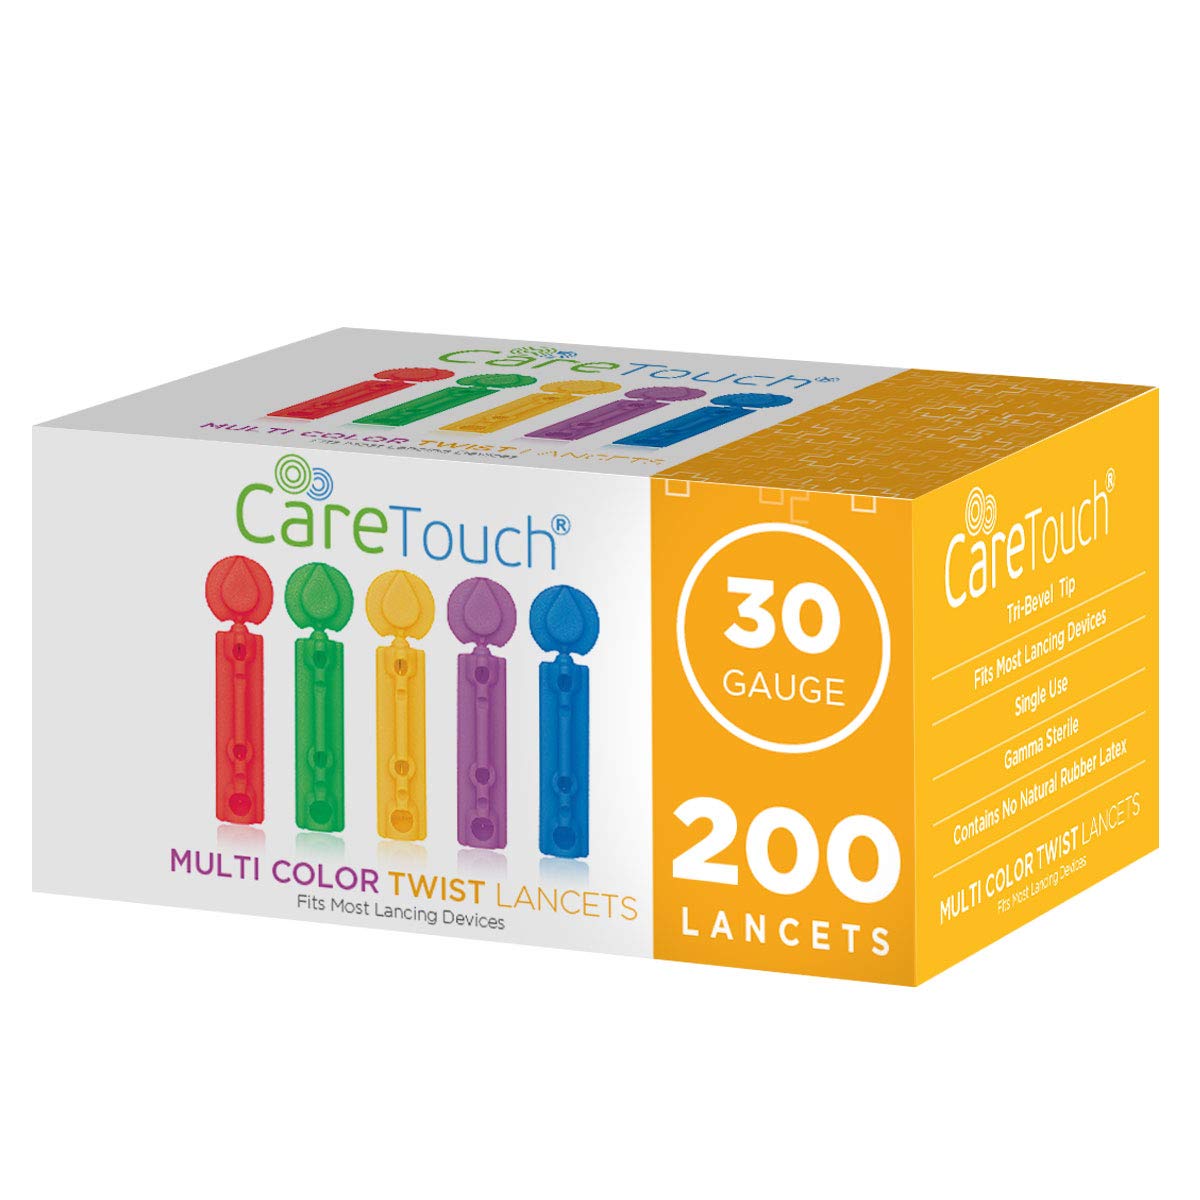 Lancets for Diabetes Testing - 30 Gauge Diabetic Lancets for Blood Testing and Glucose Testing - Fits Most Lancing Devices - Sterile, Single Use 30g Blood Sugar Lancets - Multicolored - 200 Count